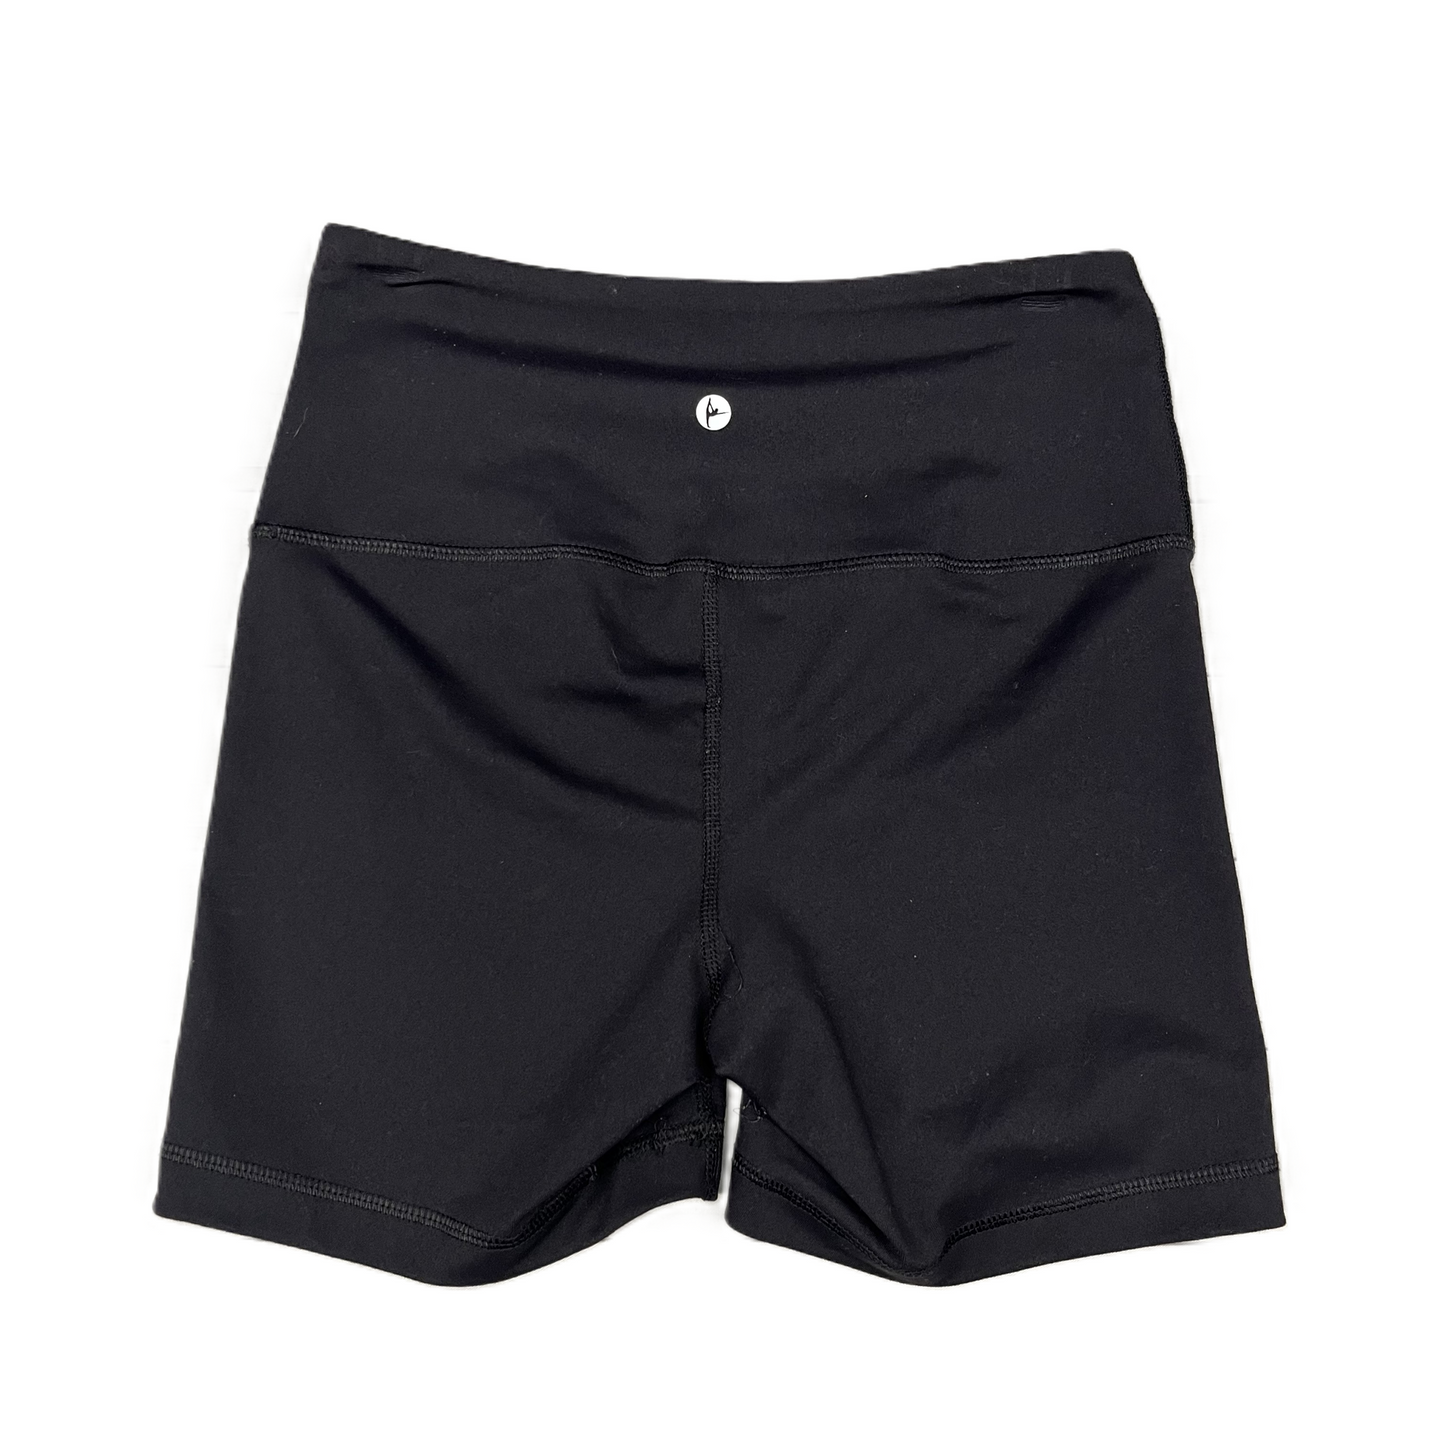 Black Athletic Shorts By 90 Degrees By Reflex, Size: S